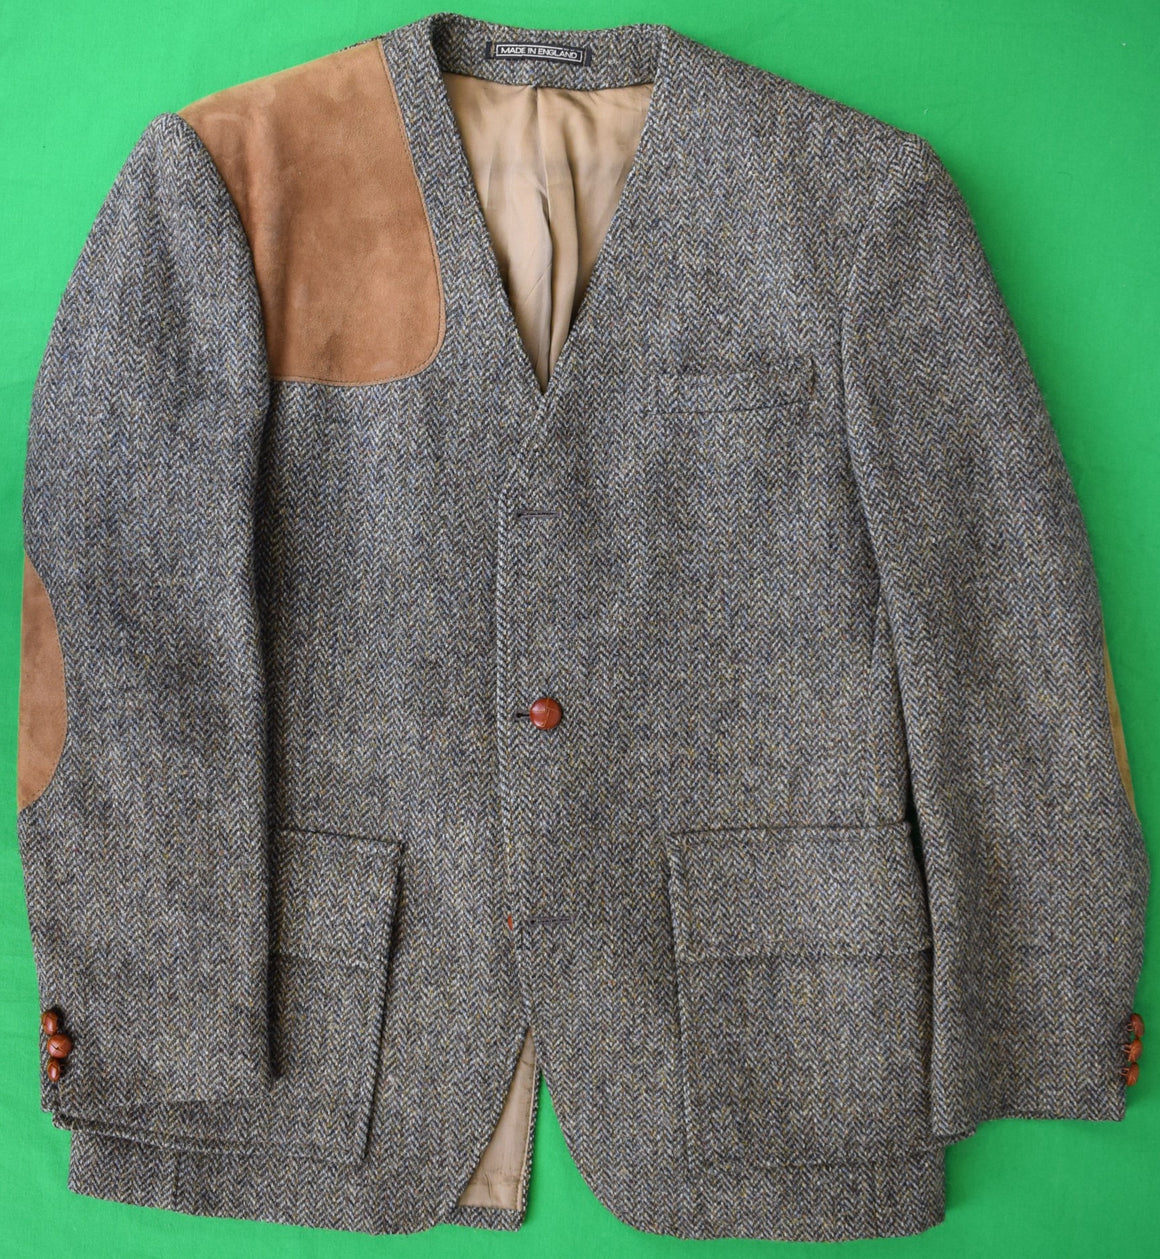 "Harris Tweed HB English Shooting Jacket w/ Suede Elbow Patches/ Shoulder Pad" Sz 40R